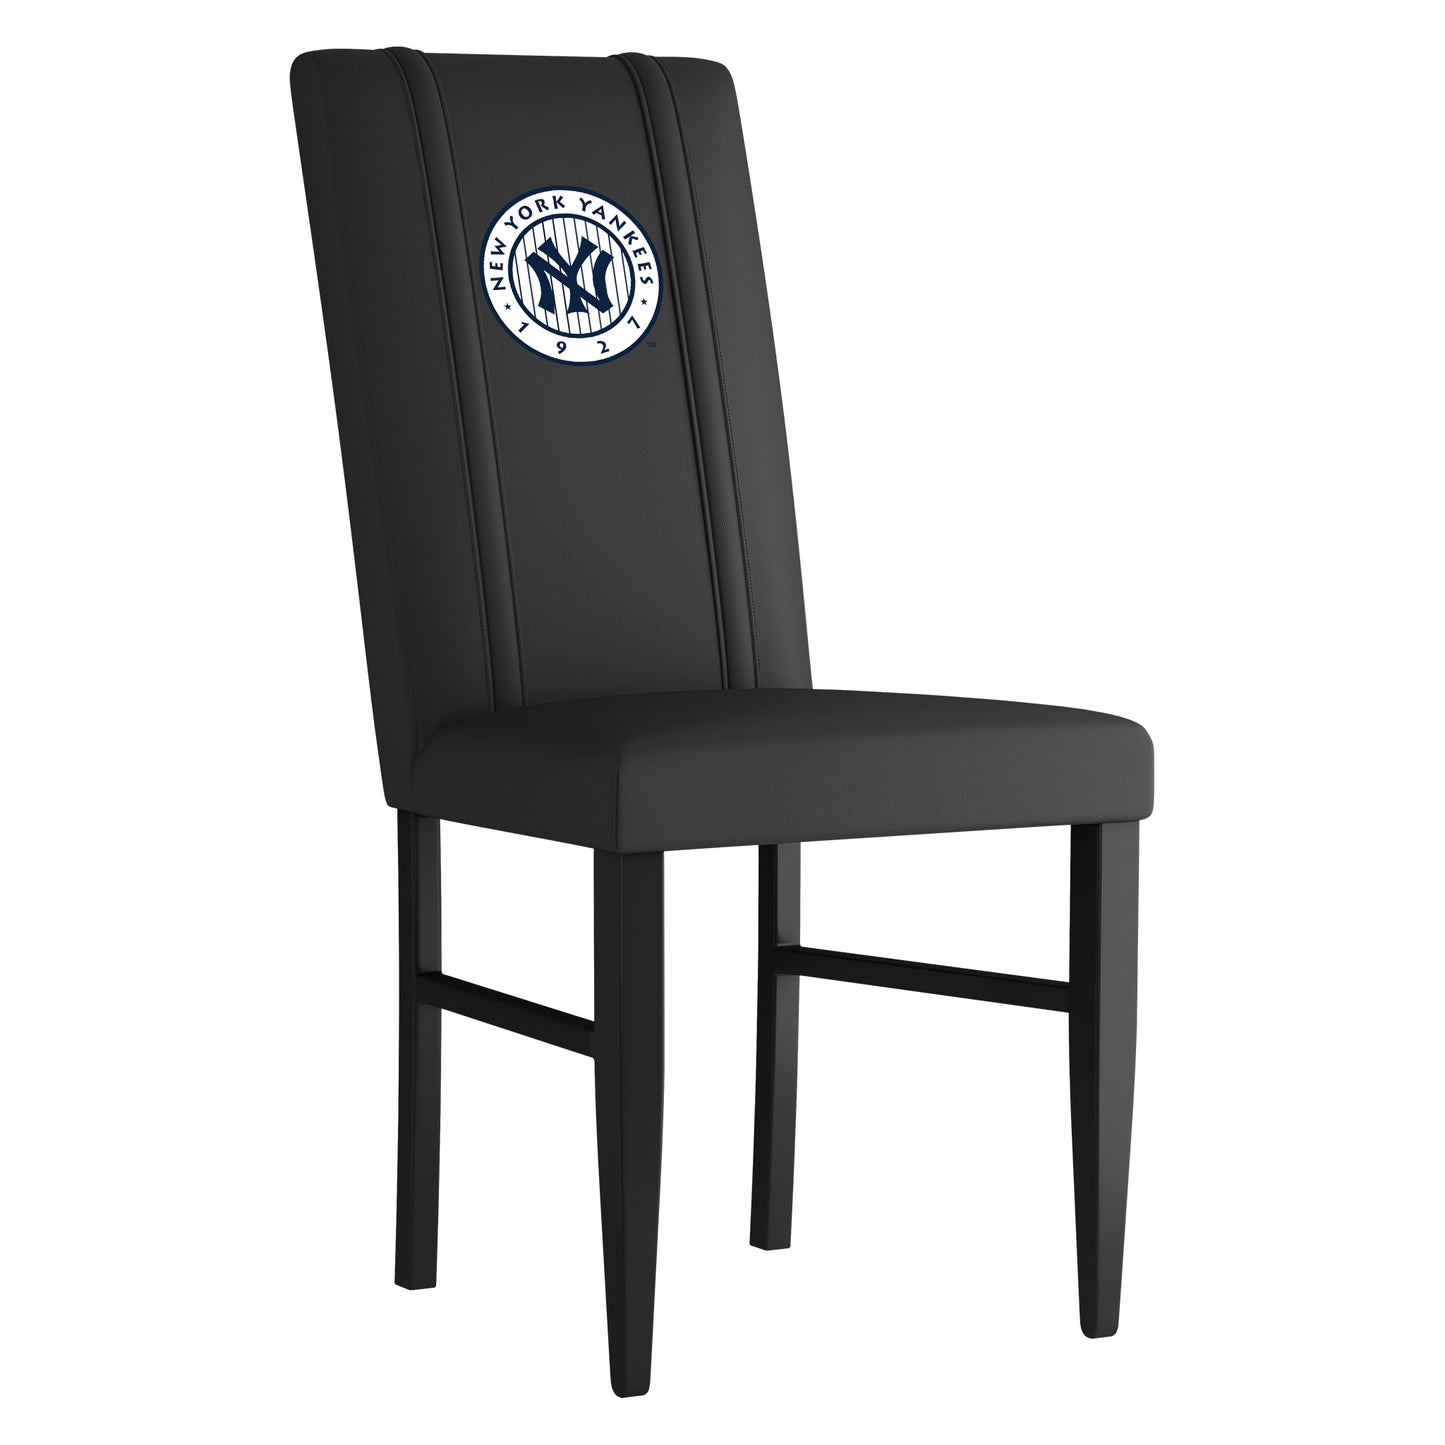 Side Chair 2000 with New York Yankees Cooperstown Set of 2